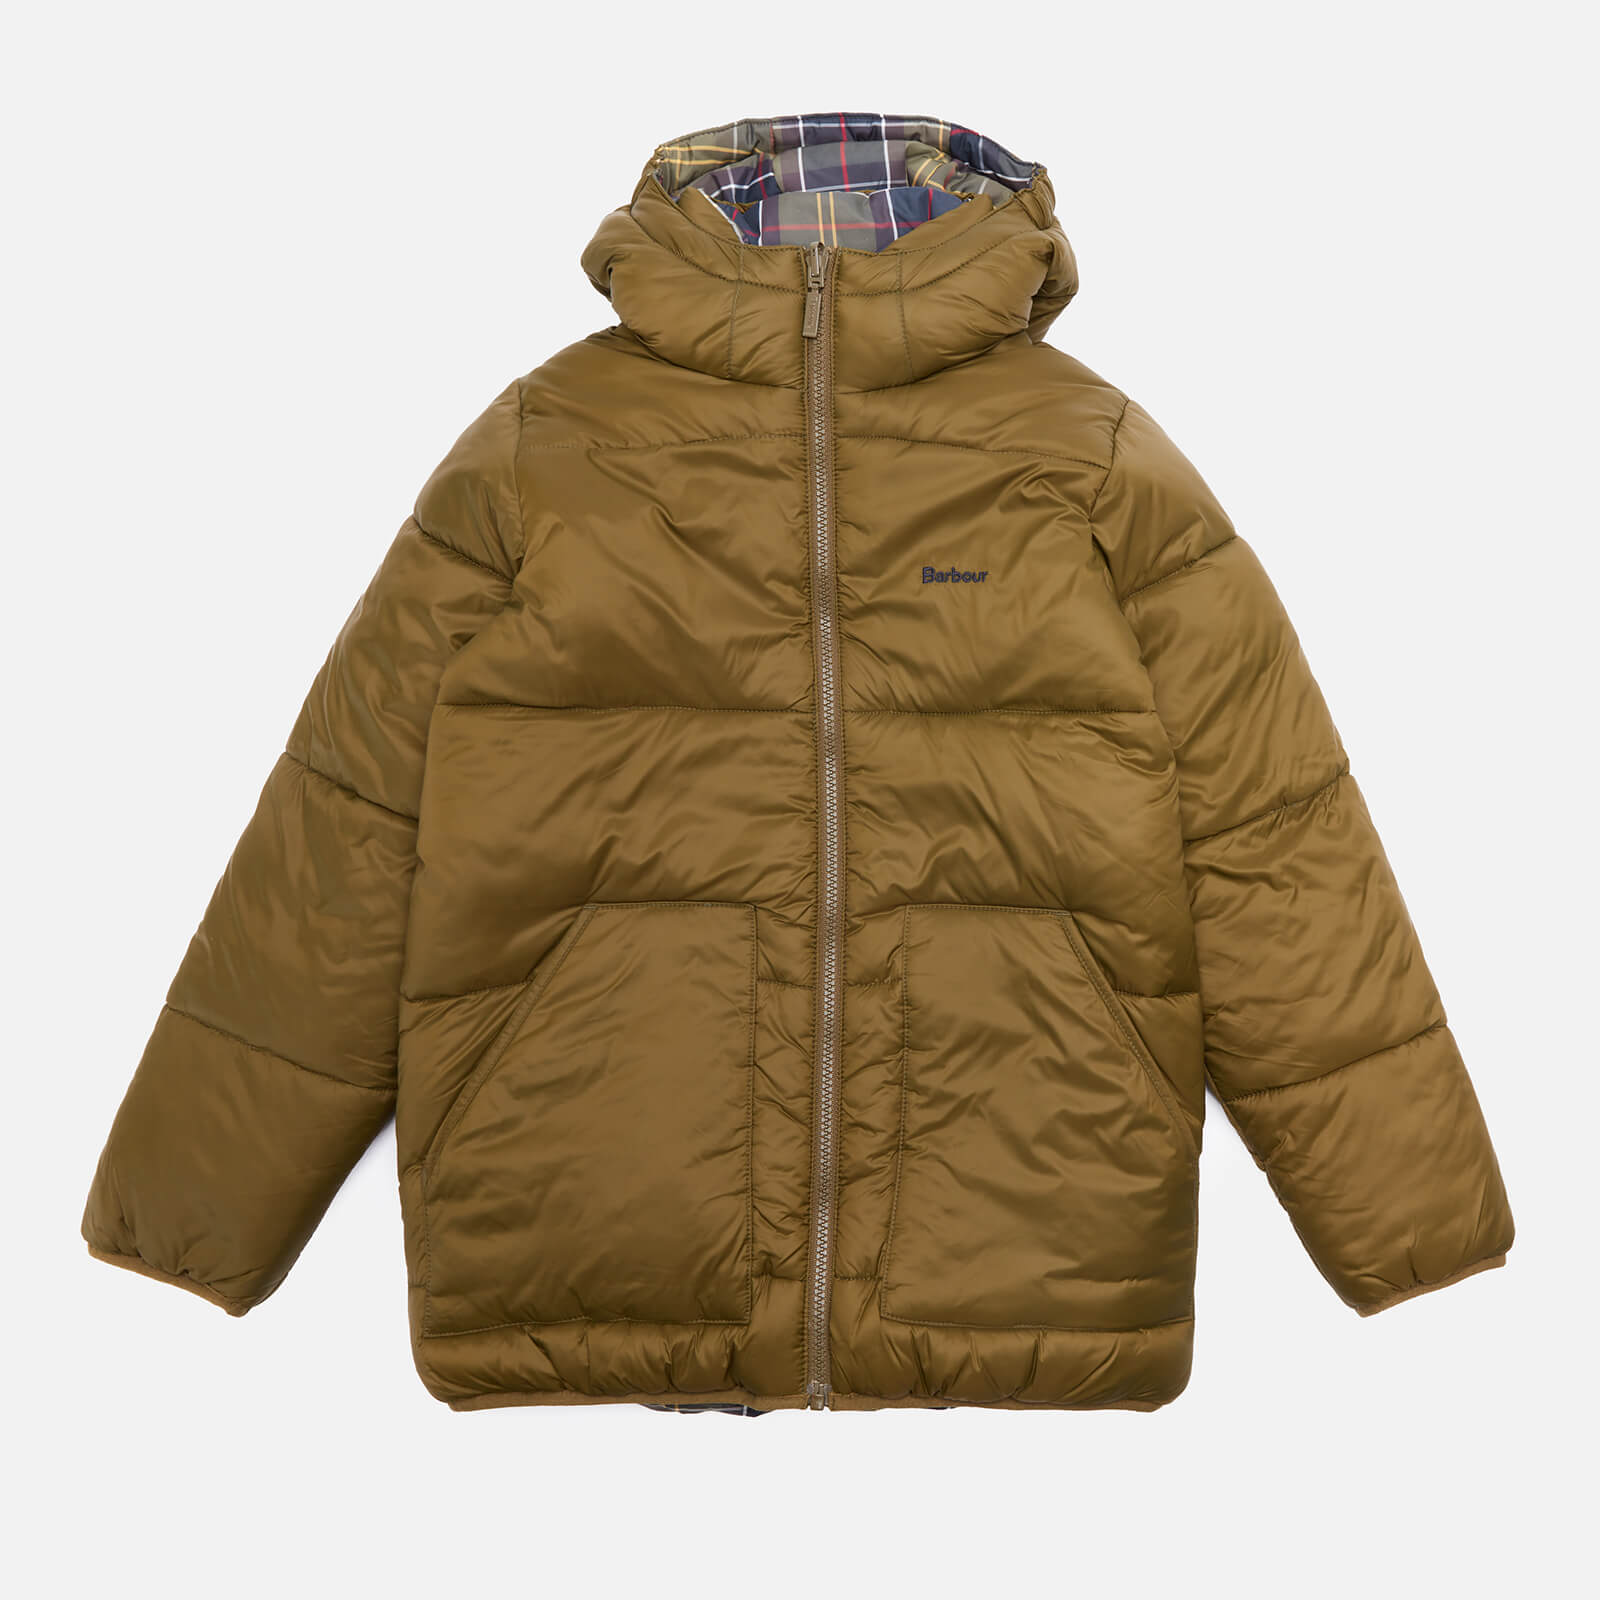 Barbour Boys' Hike Reversible Quilted Jacket - Uniform Olive - S (6-7 Years)